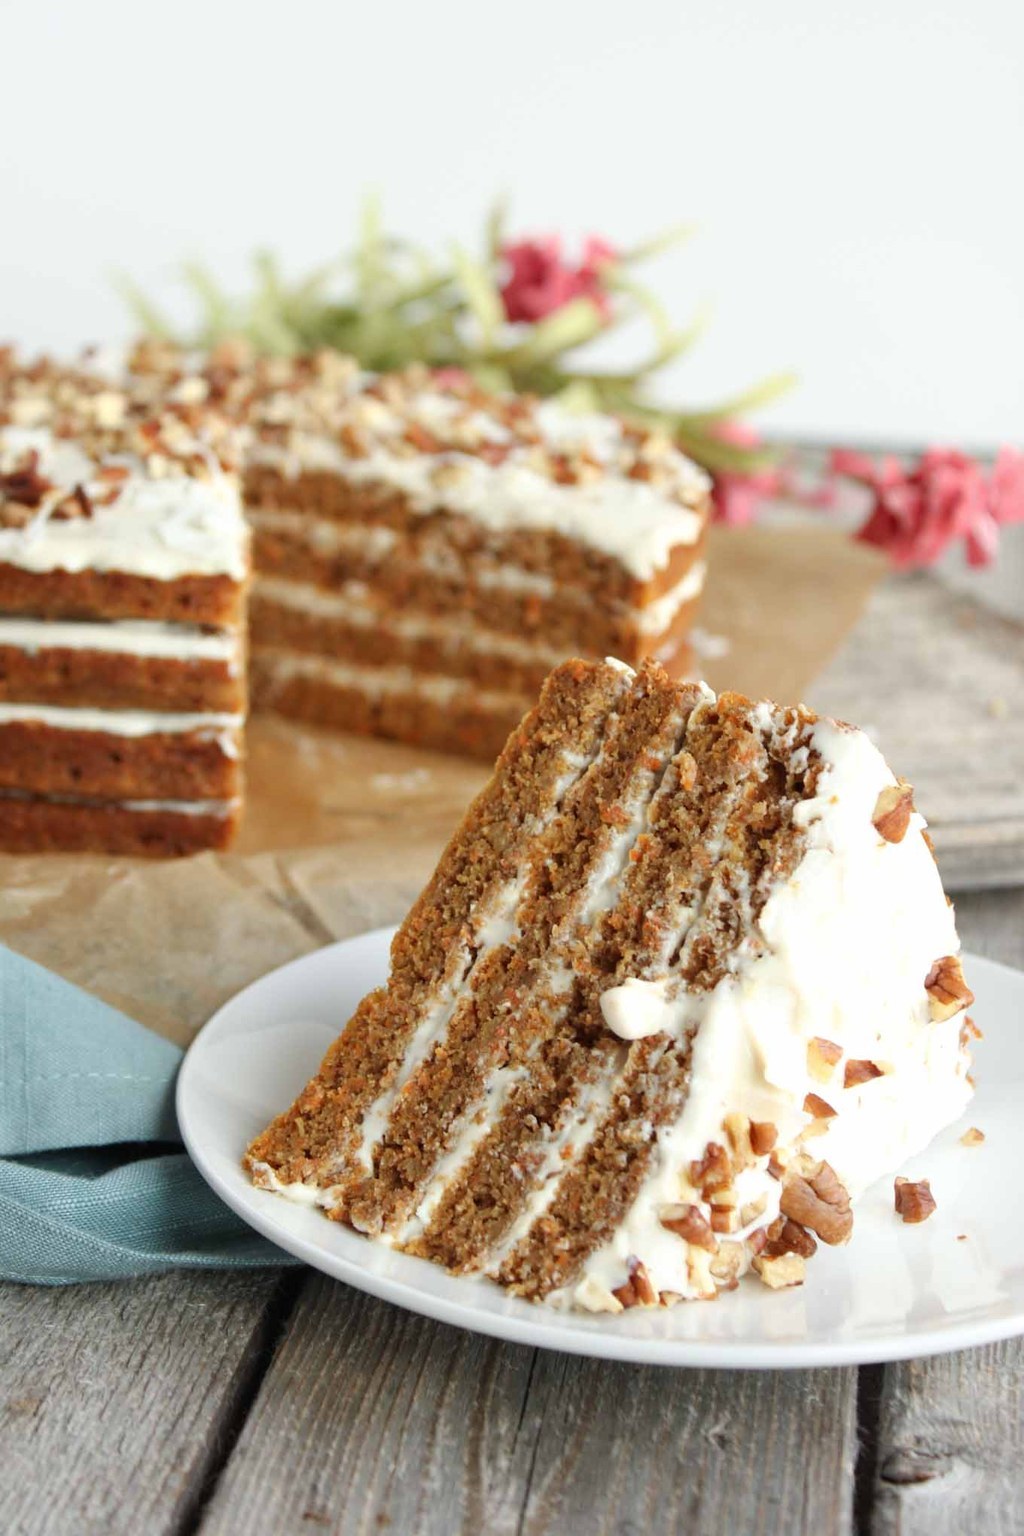 25 Layered Cakes That Are On A Whole Different Level